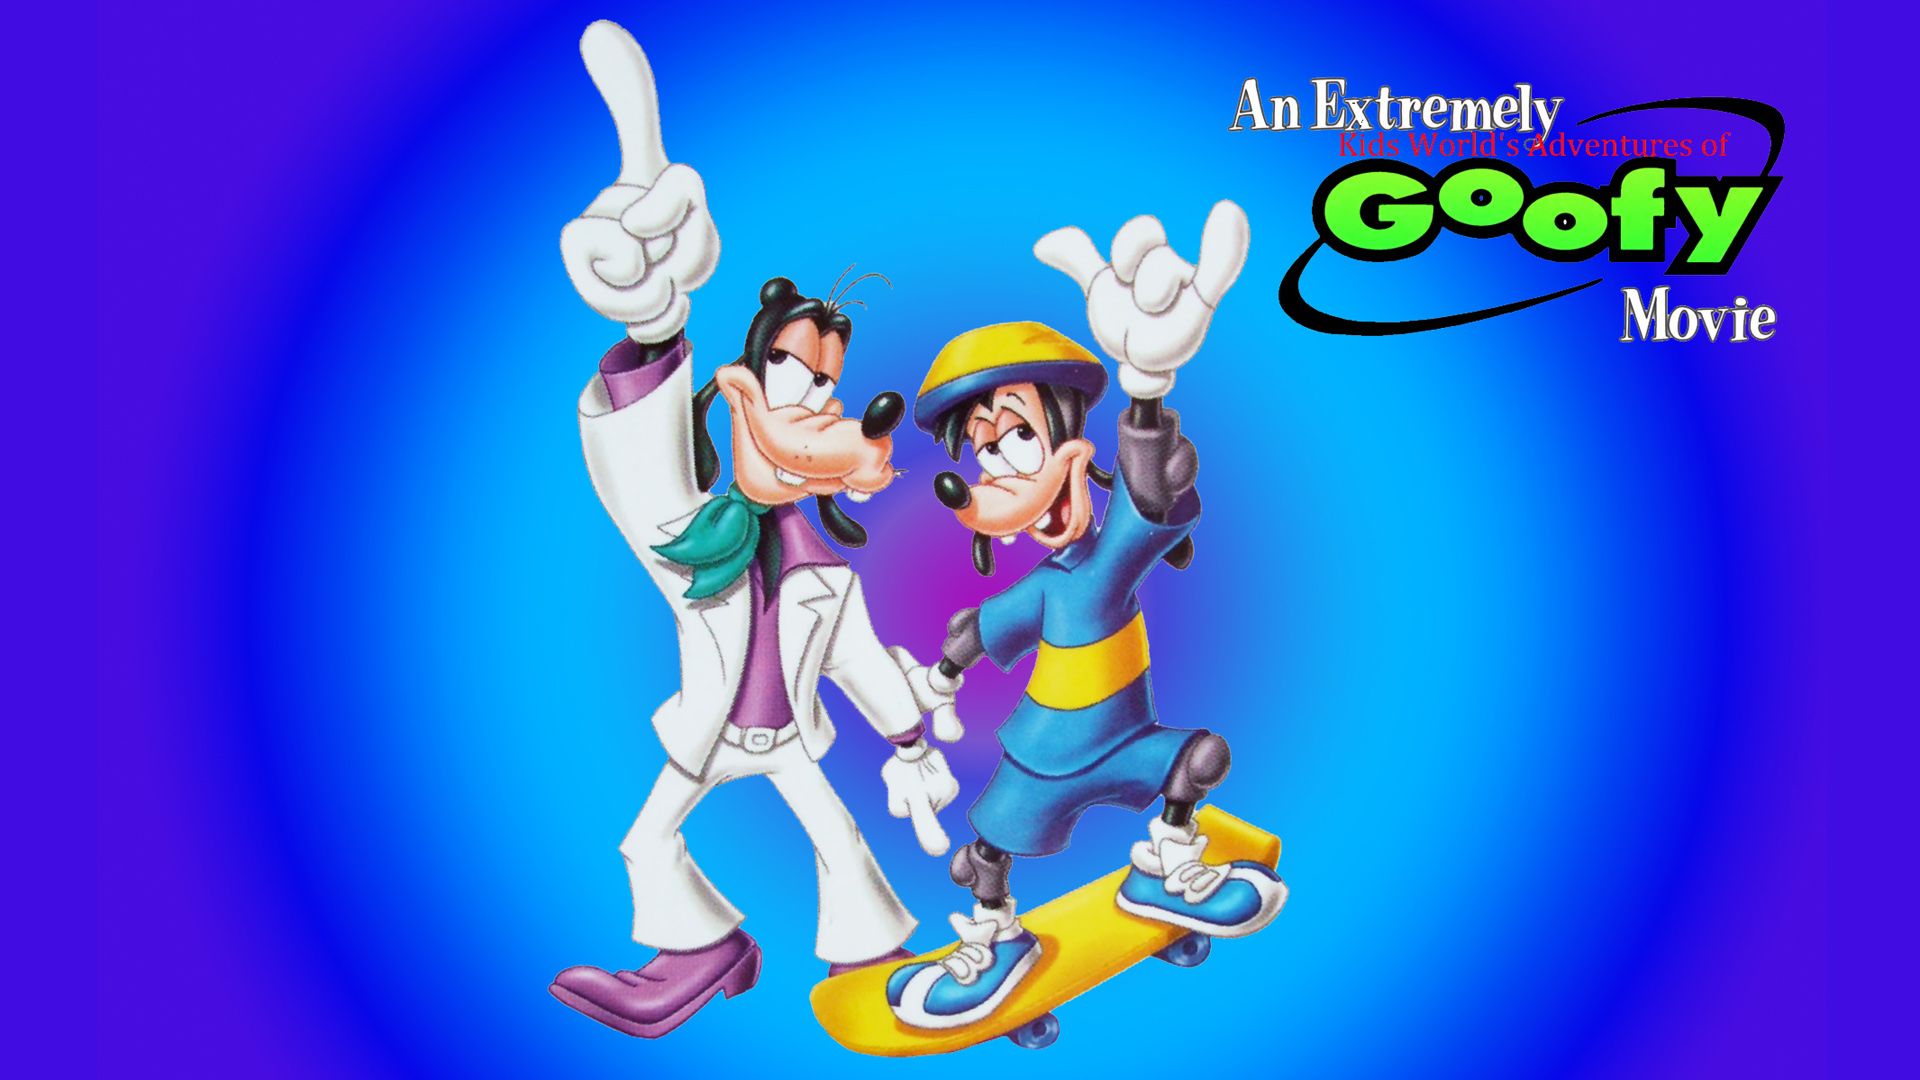 An Extremely Goofy Movie Desktop HD Wallpaper For Mobile Phones